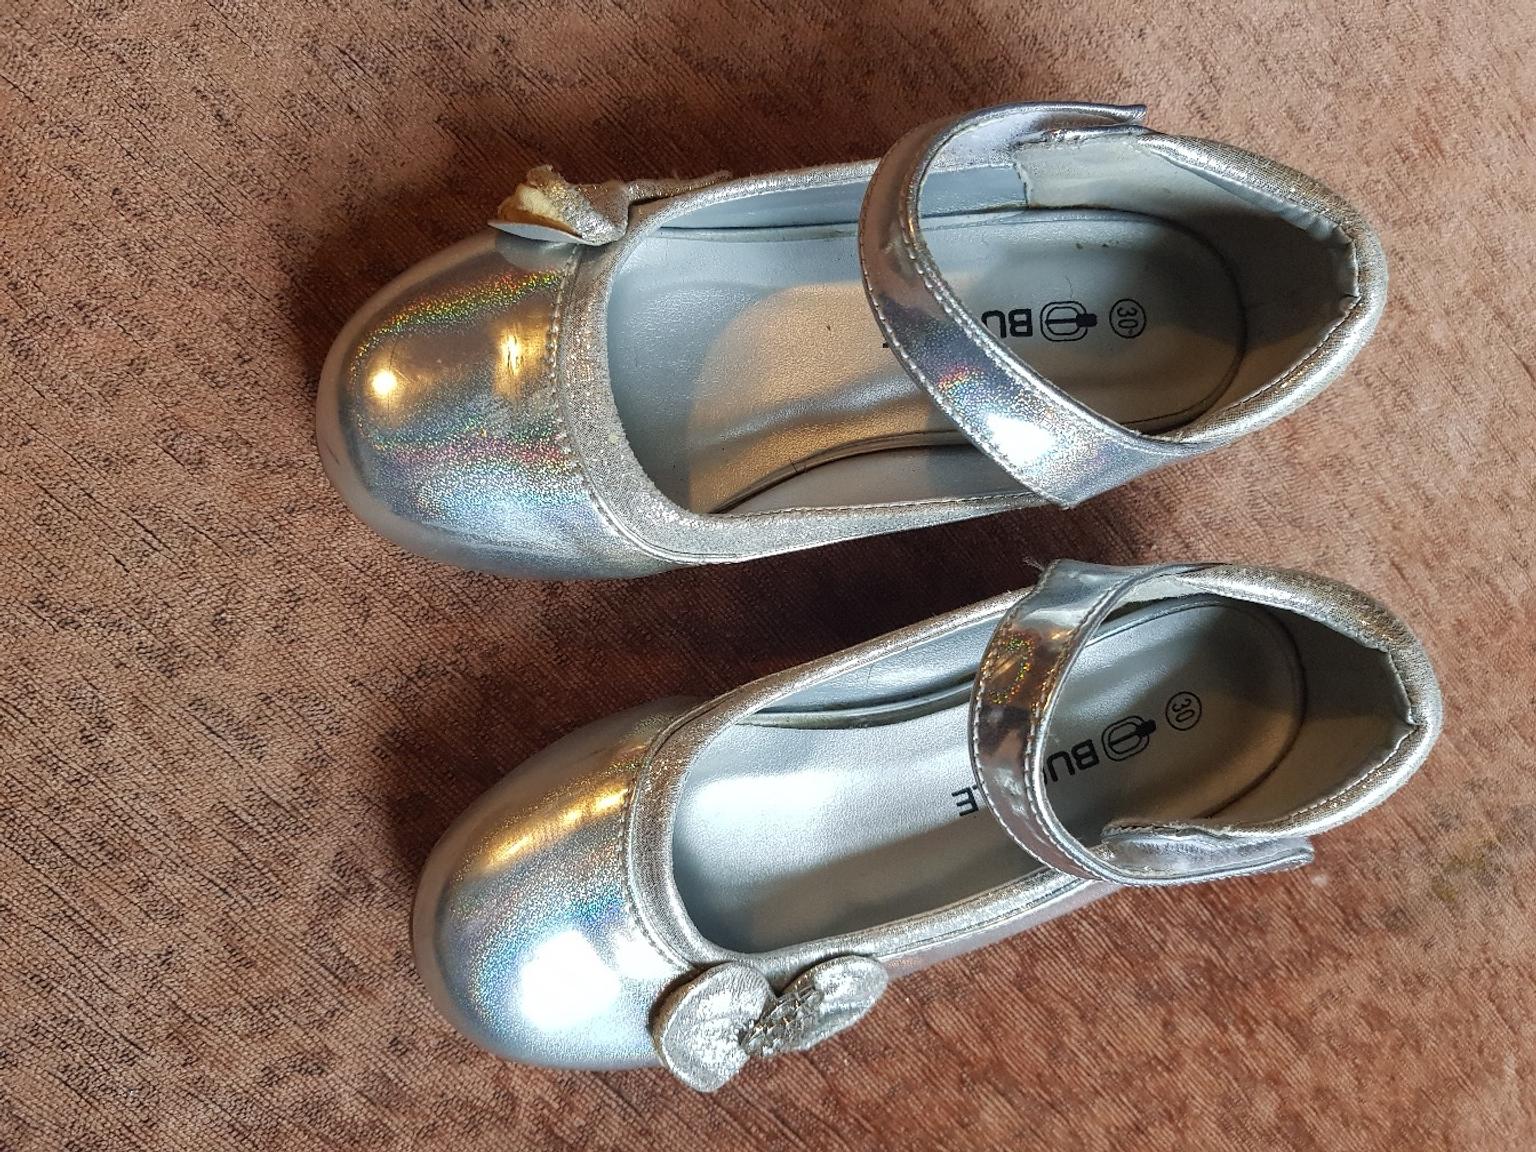 size 11 silver shoes